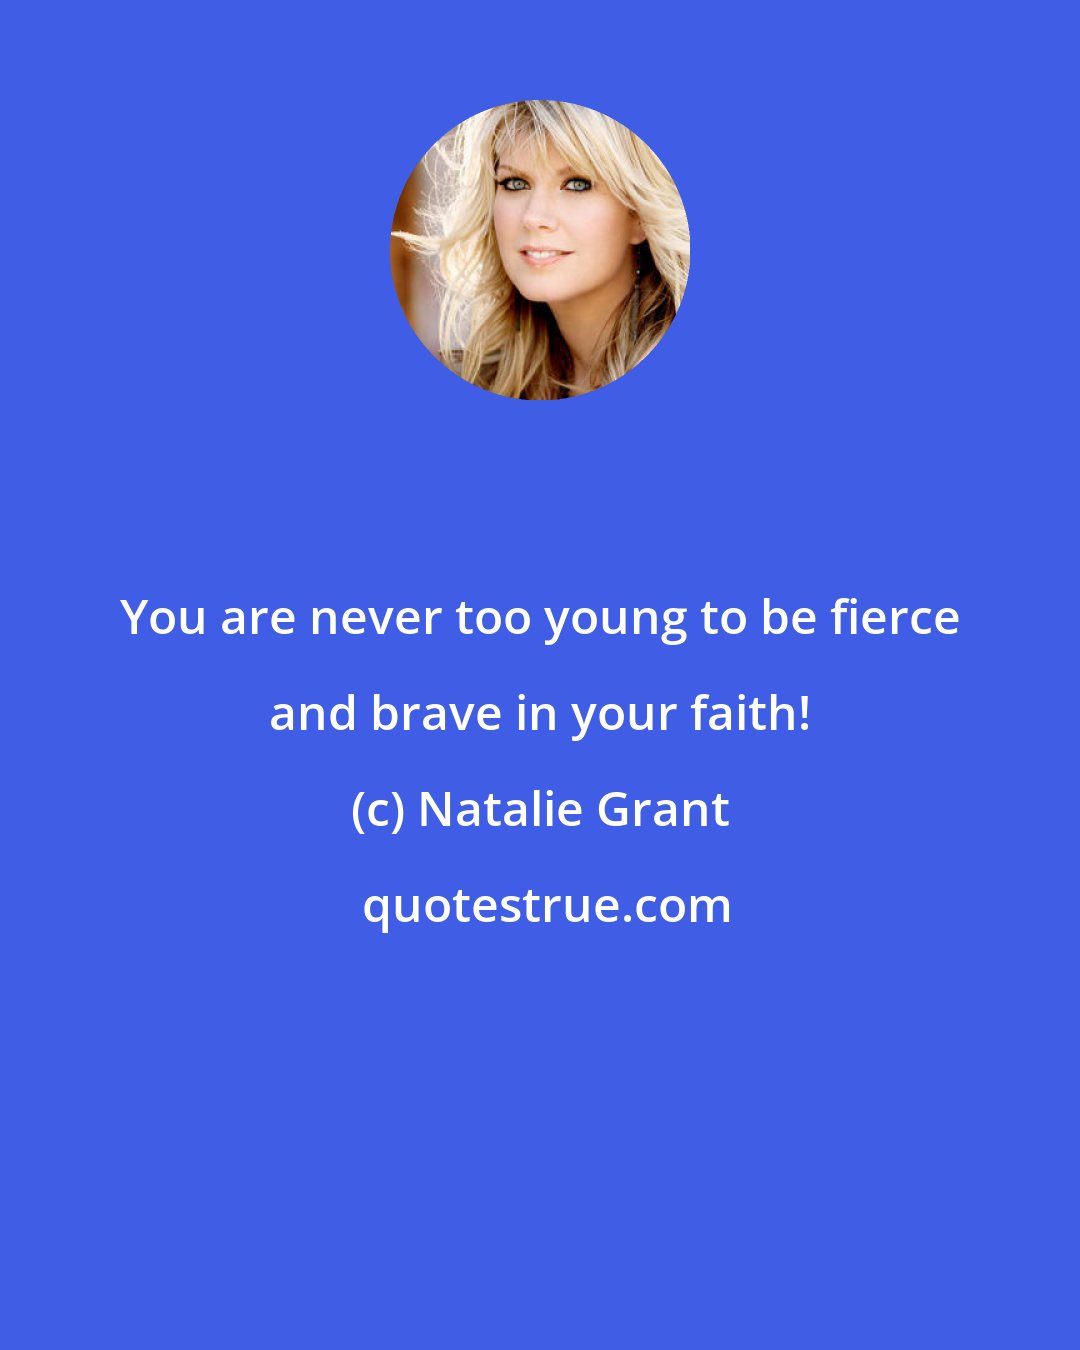 Natalie Grant: You are never too young to be fierce and brave in your faith!